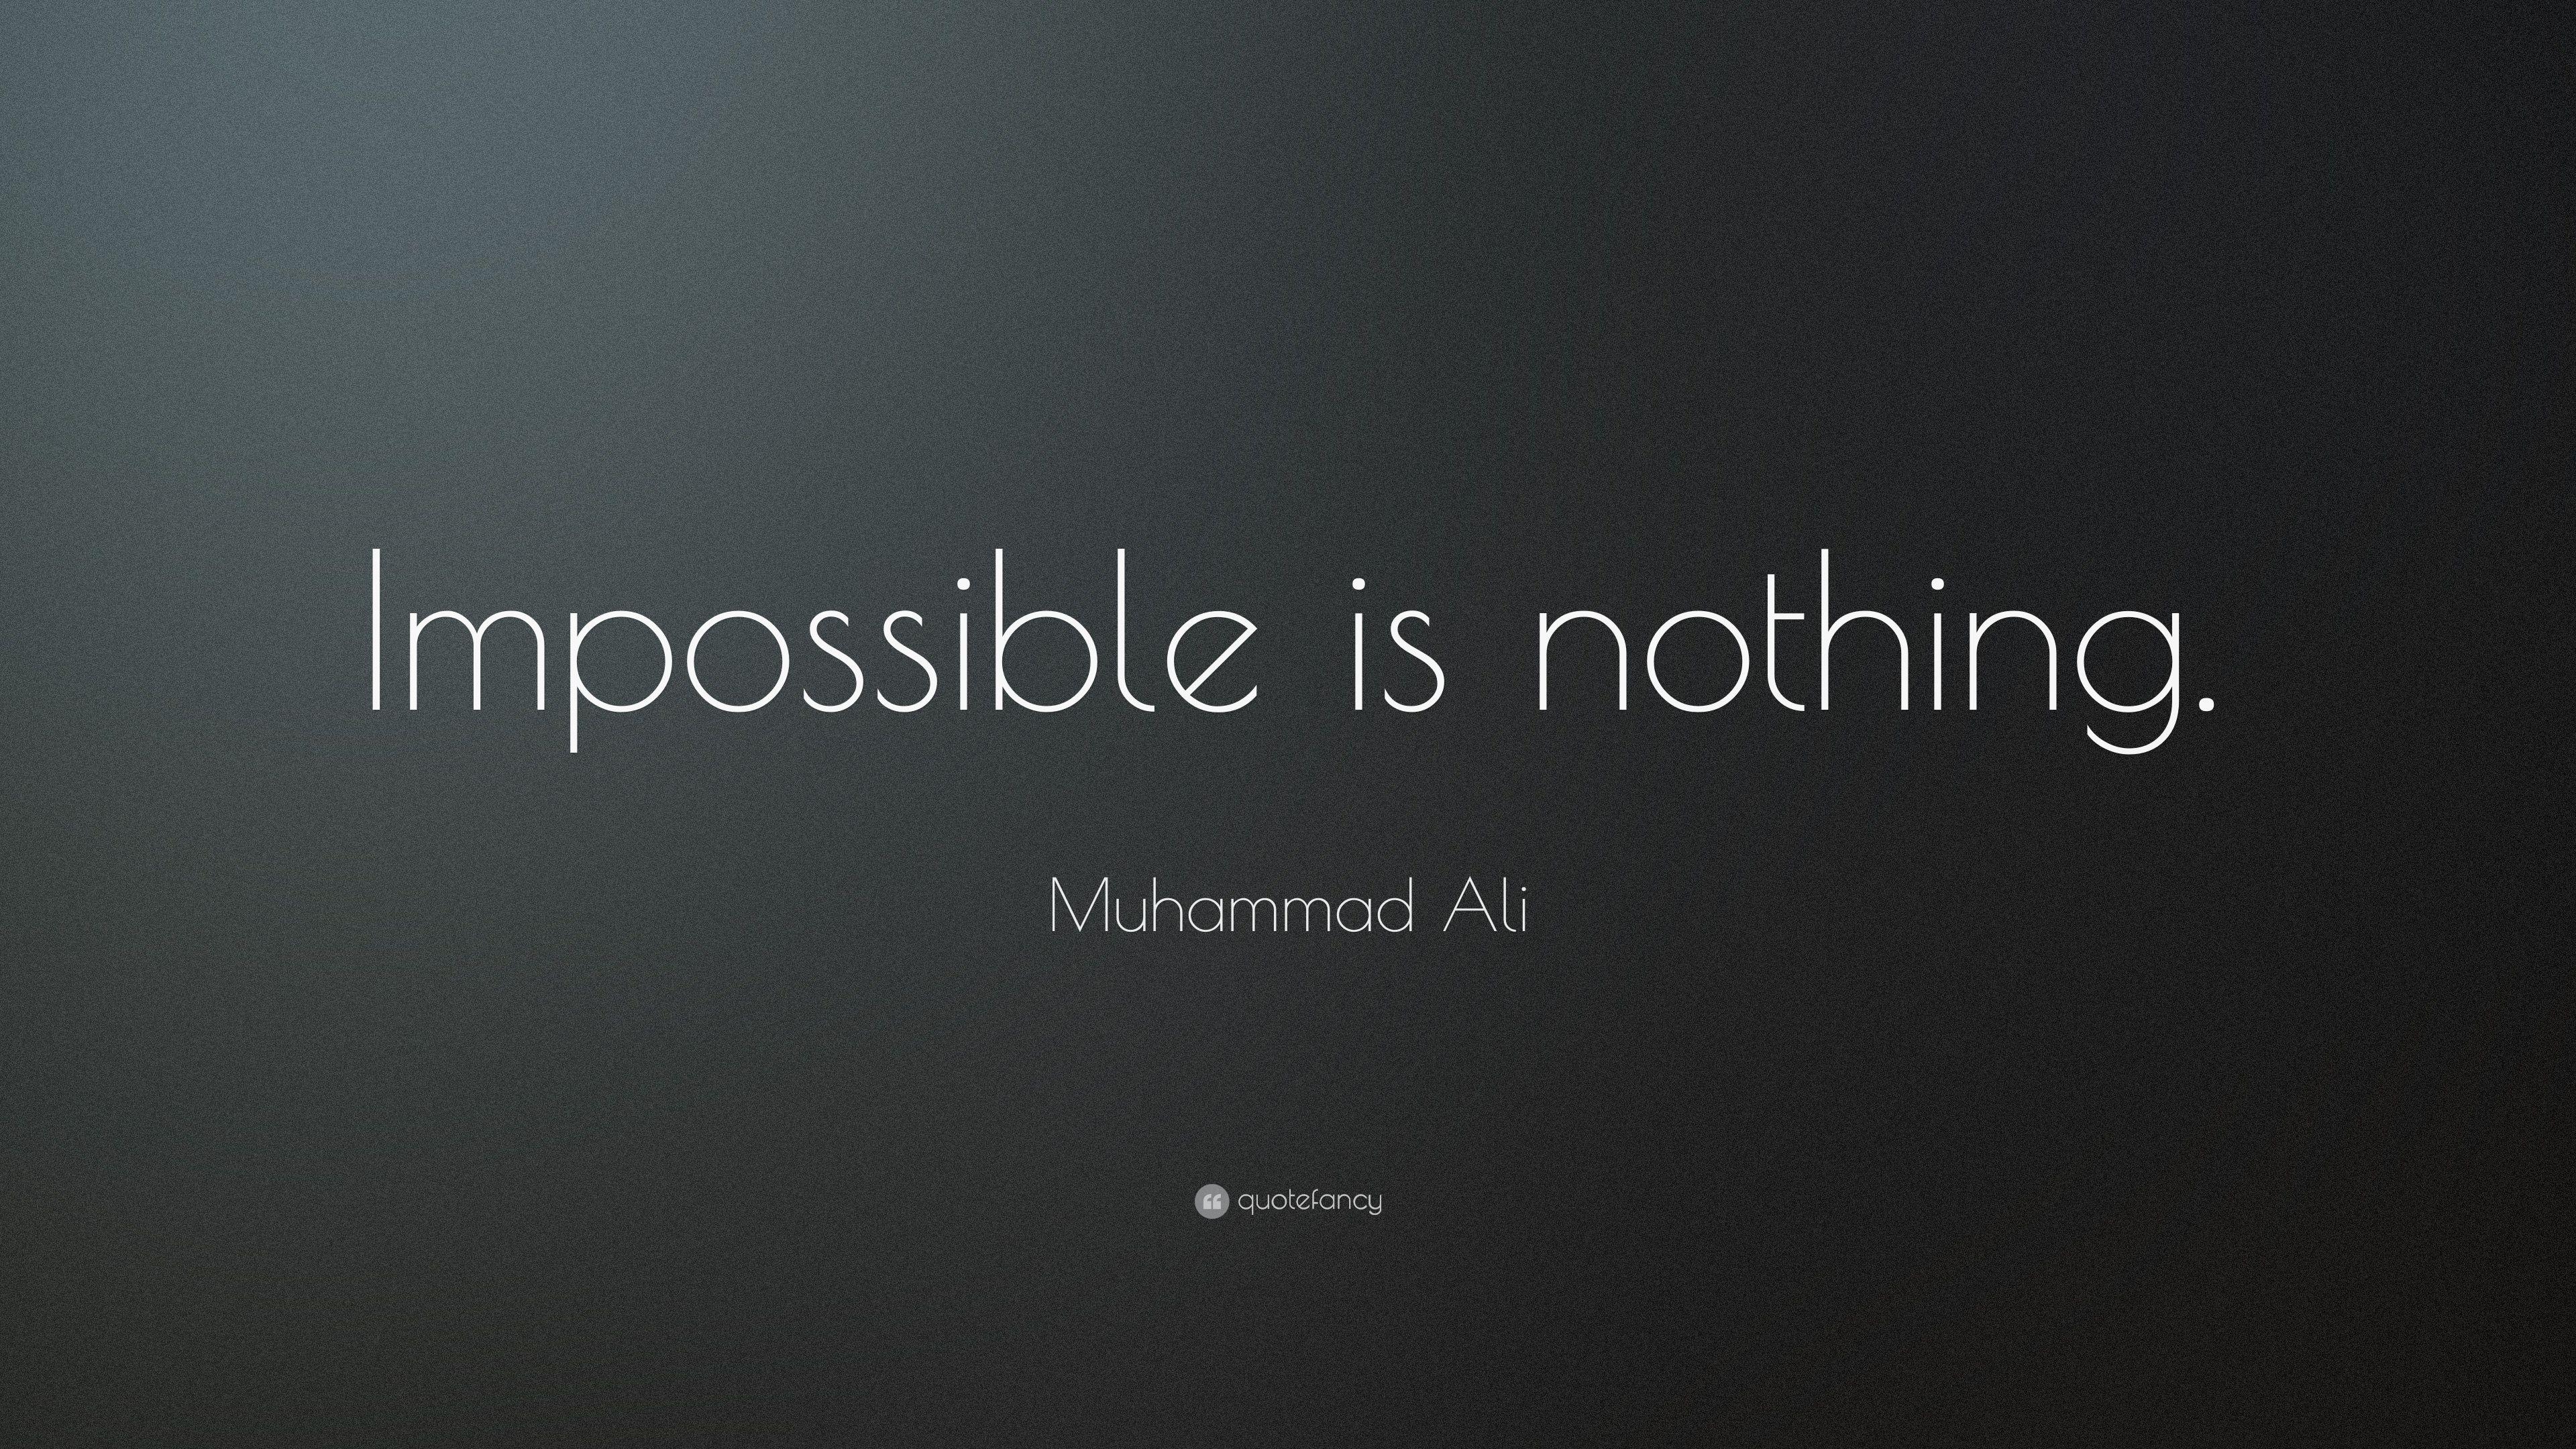 Muhammad Ali Quote: “Impossible is nothing.” 18 wallpaper